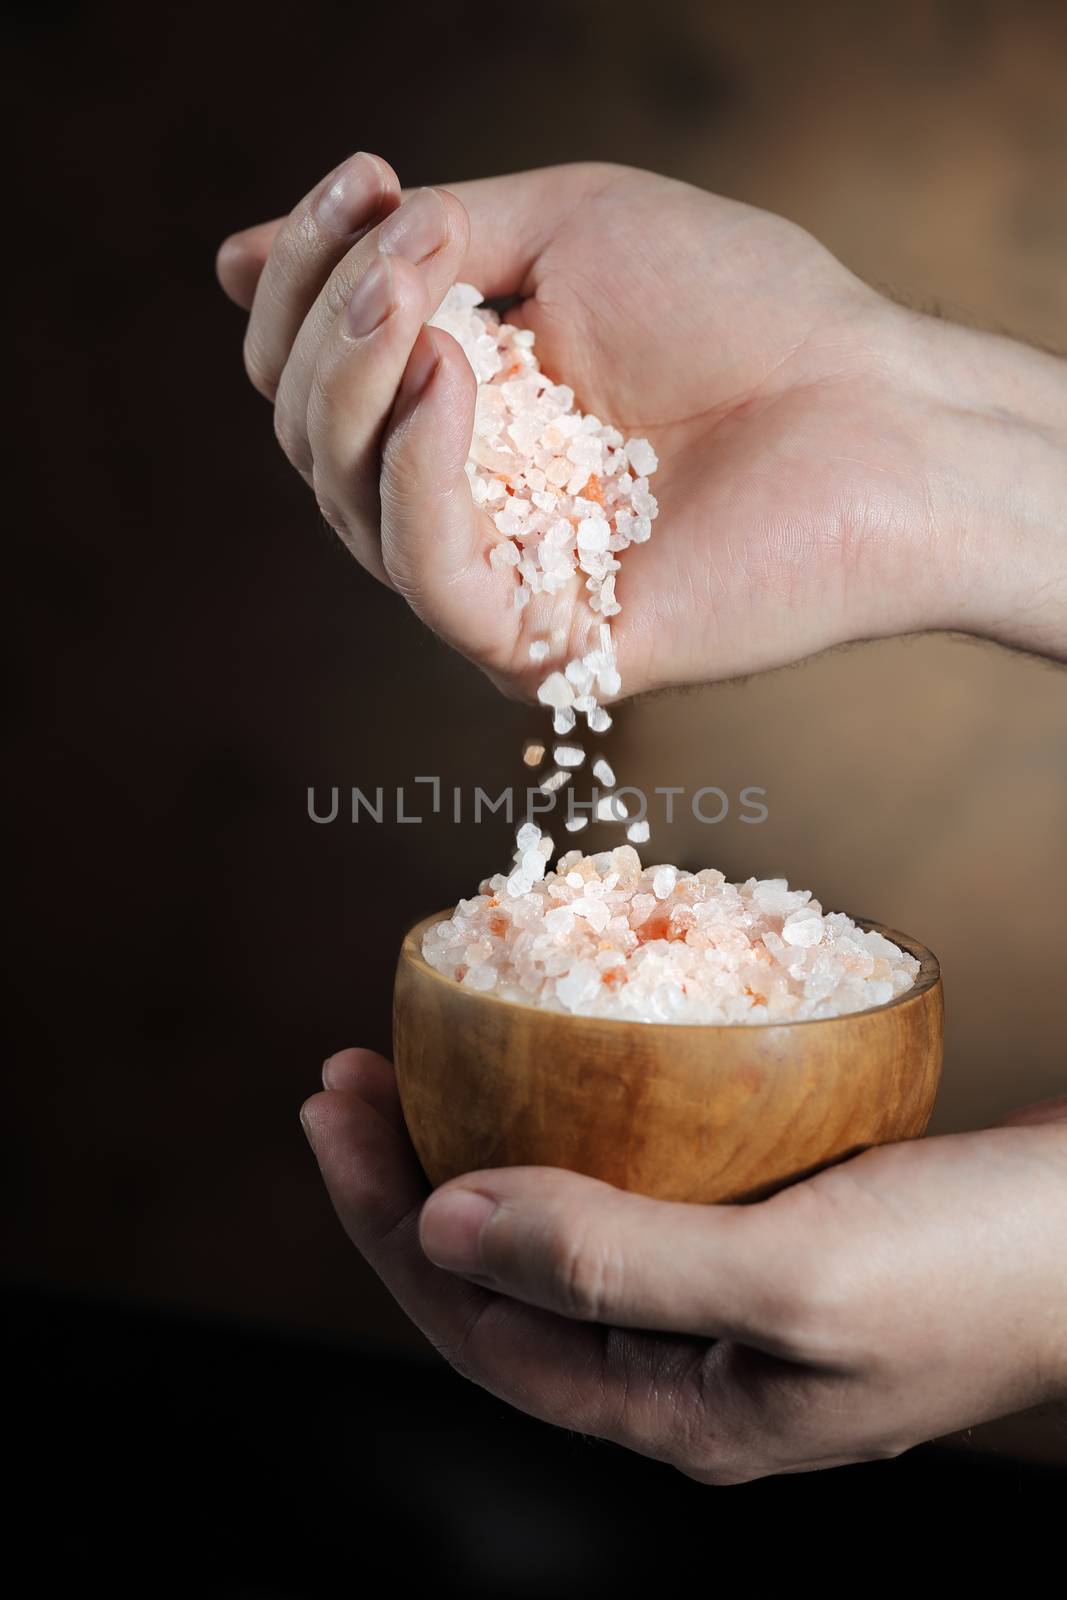 Man pouring himalayan salt crystals from his hand.